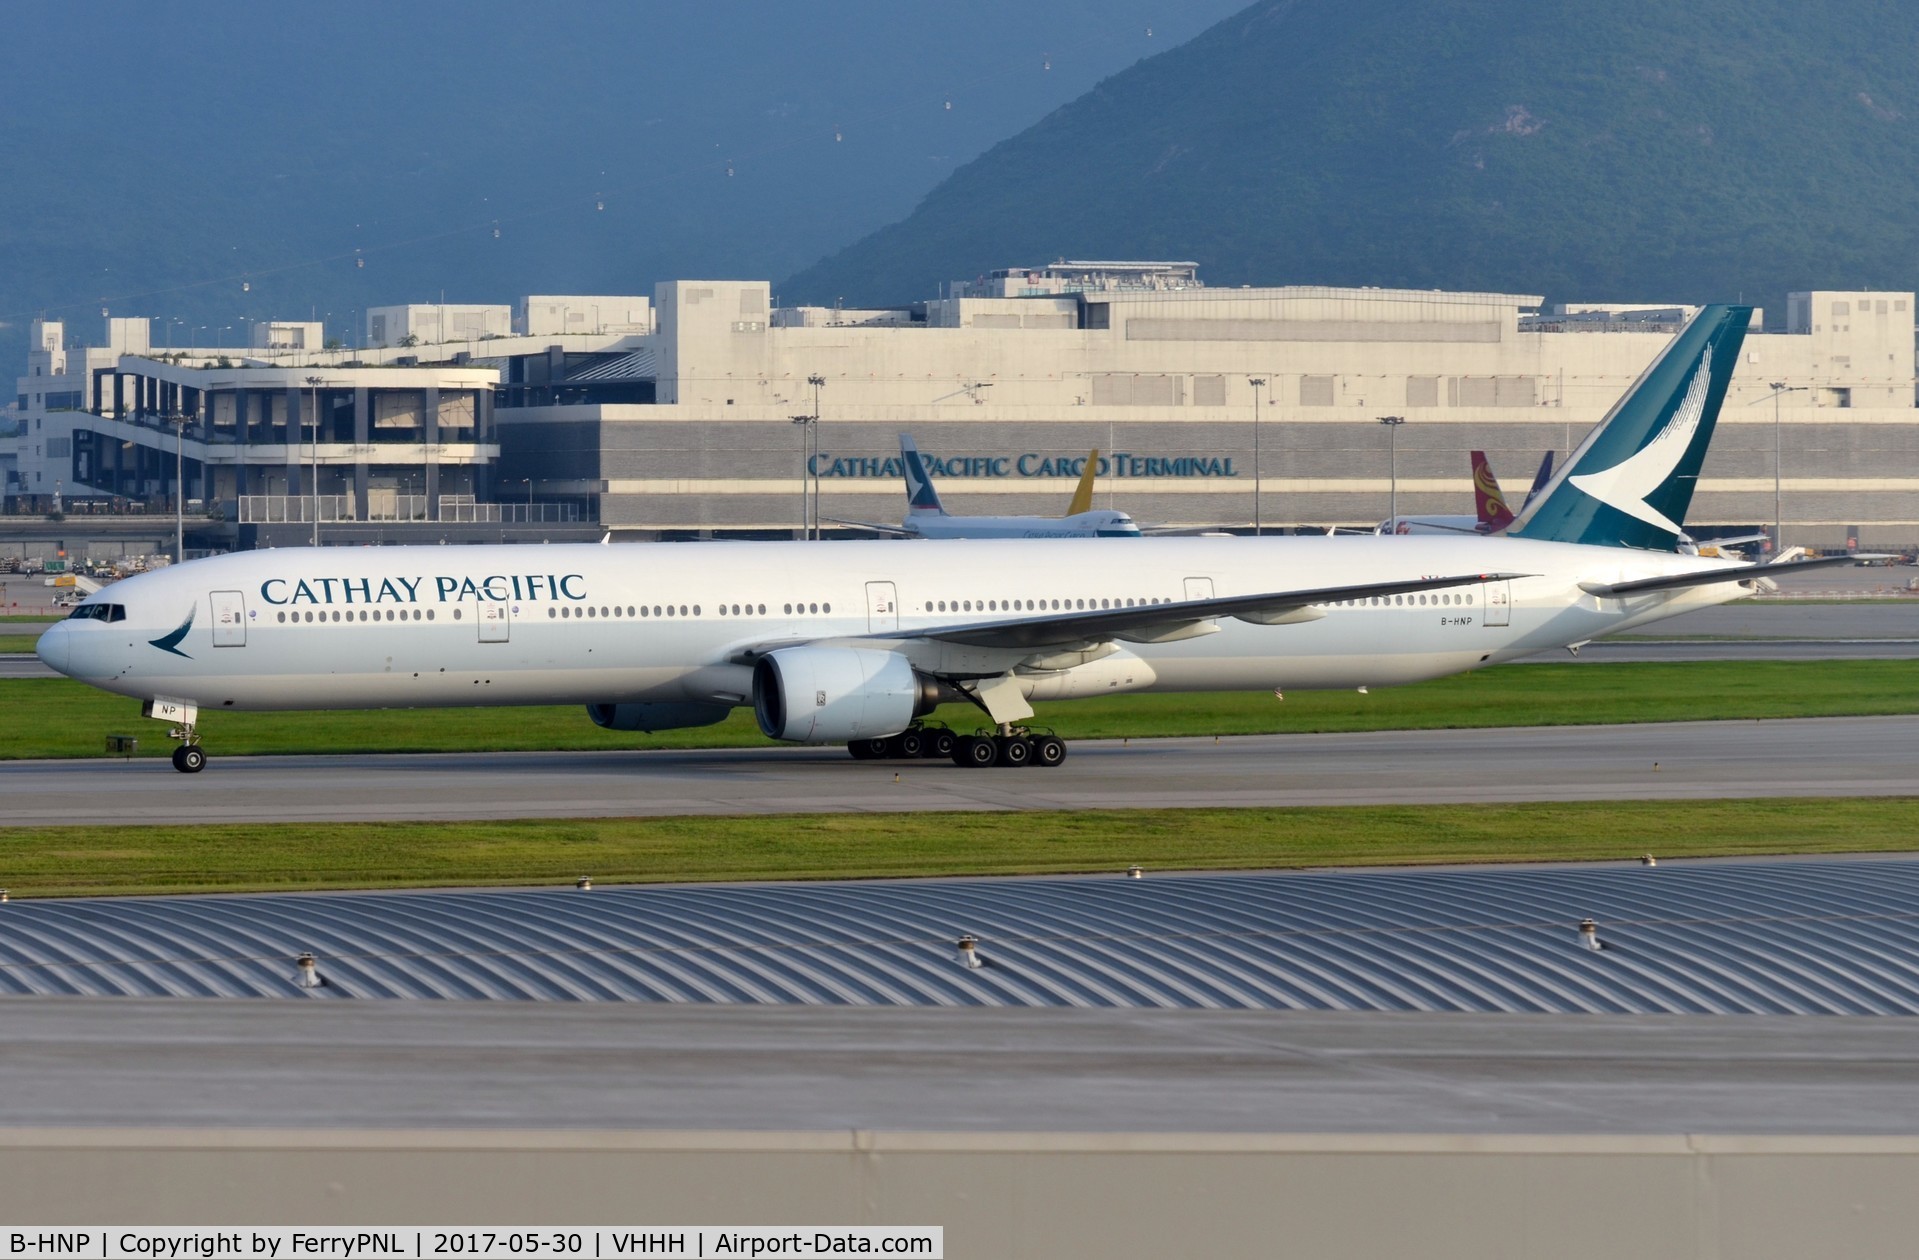 B-HNP, 2005 Boeing 777-367 C/N 34243, Cathay Pacific B773 in renewed livery.